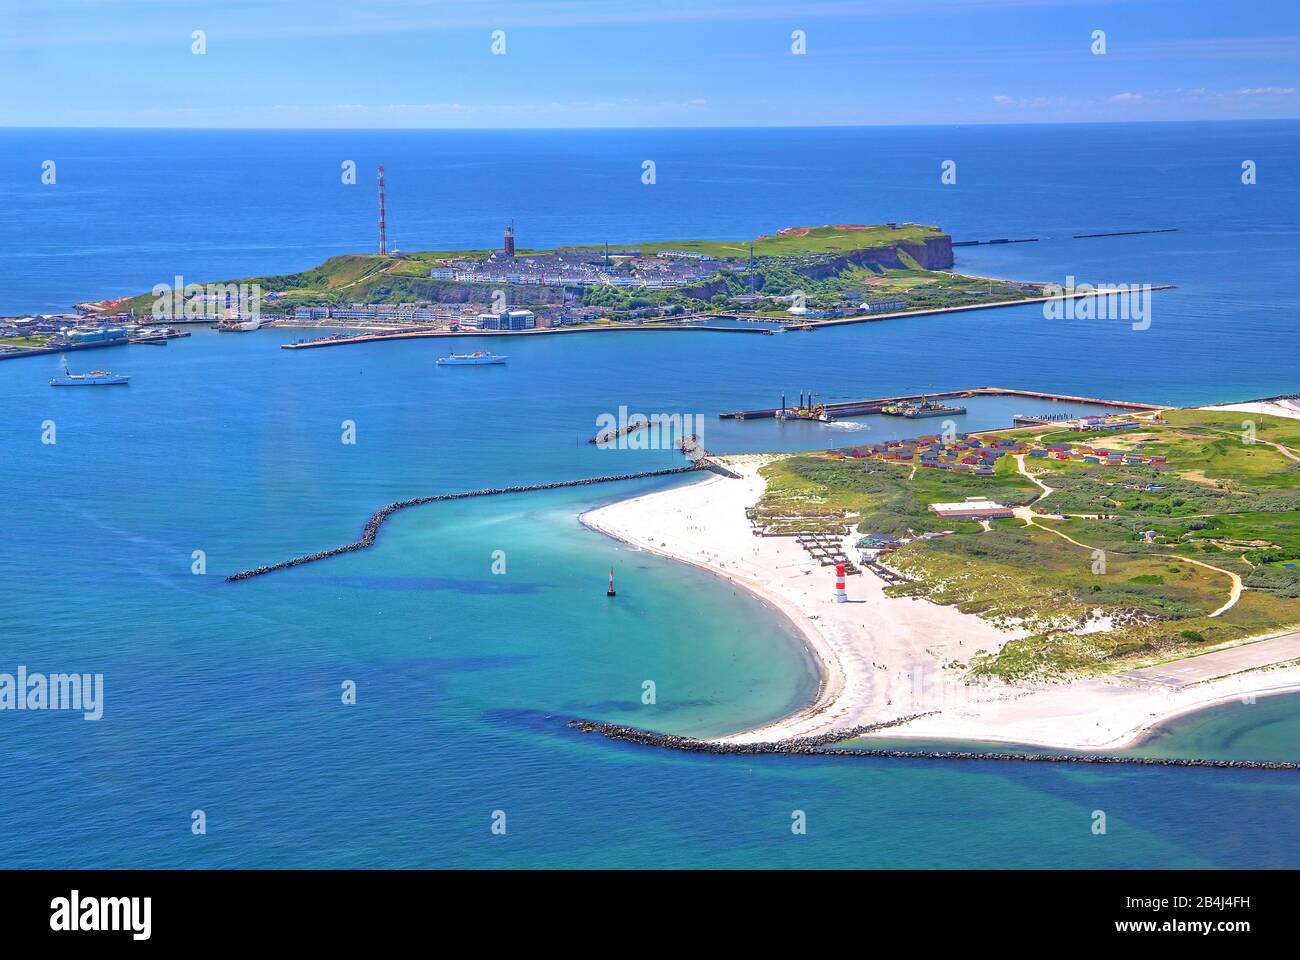 The Badedüne with south beach and lighthouse in front of the main island of the east, Heligoland, Heligoland Bay, German Bight, North Sea island, North Sea, Schleswig-Holstein, Germany Stock Photo